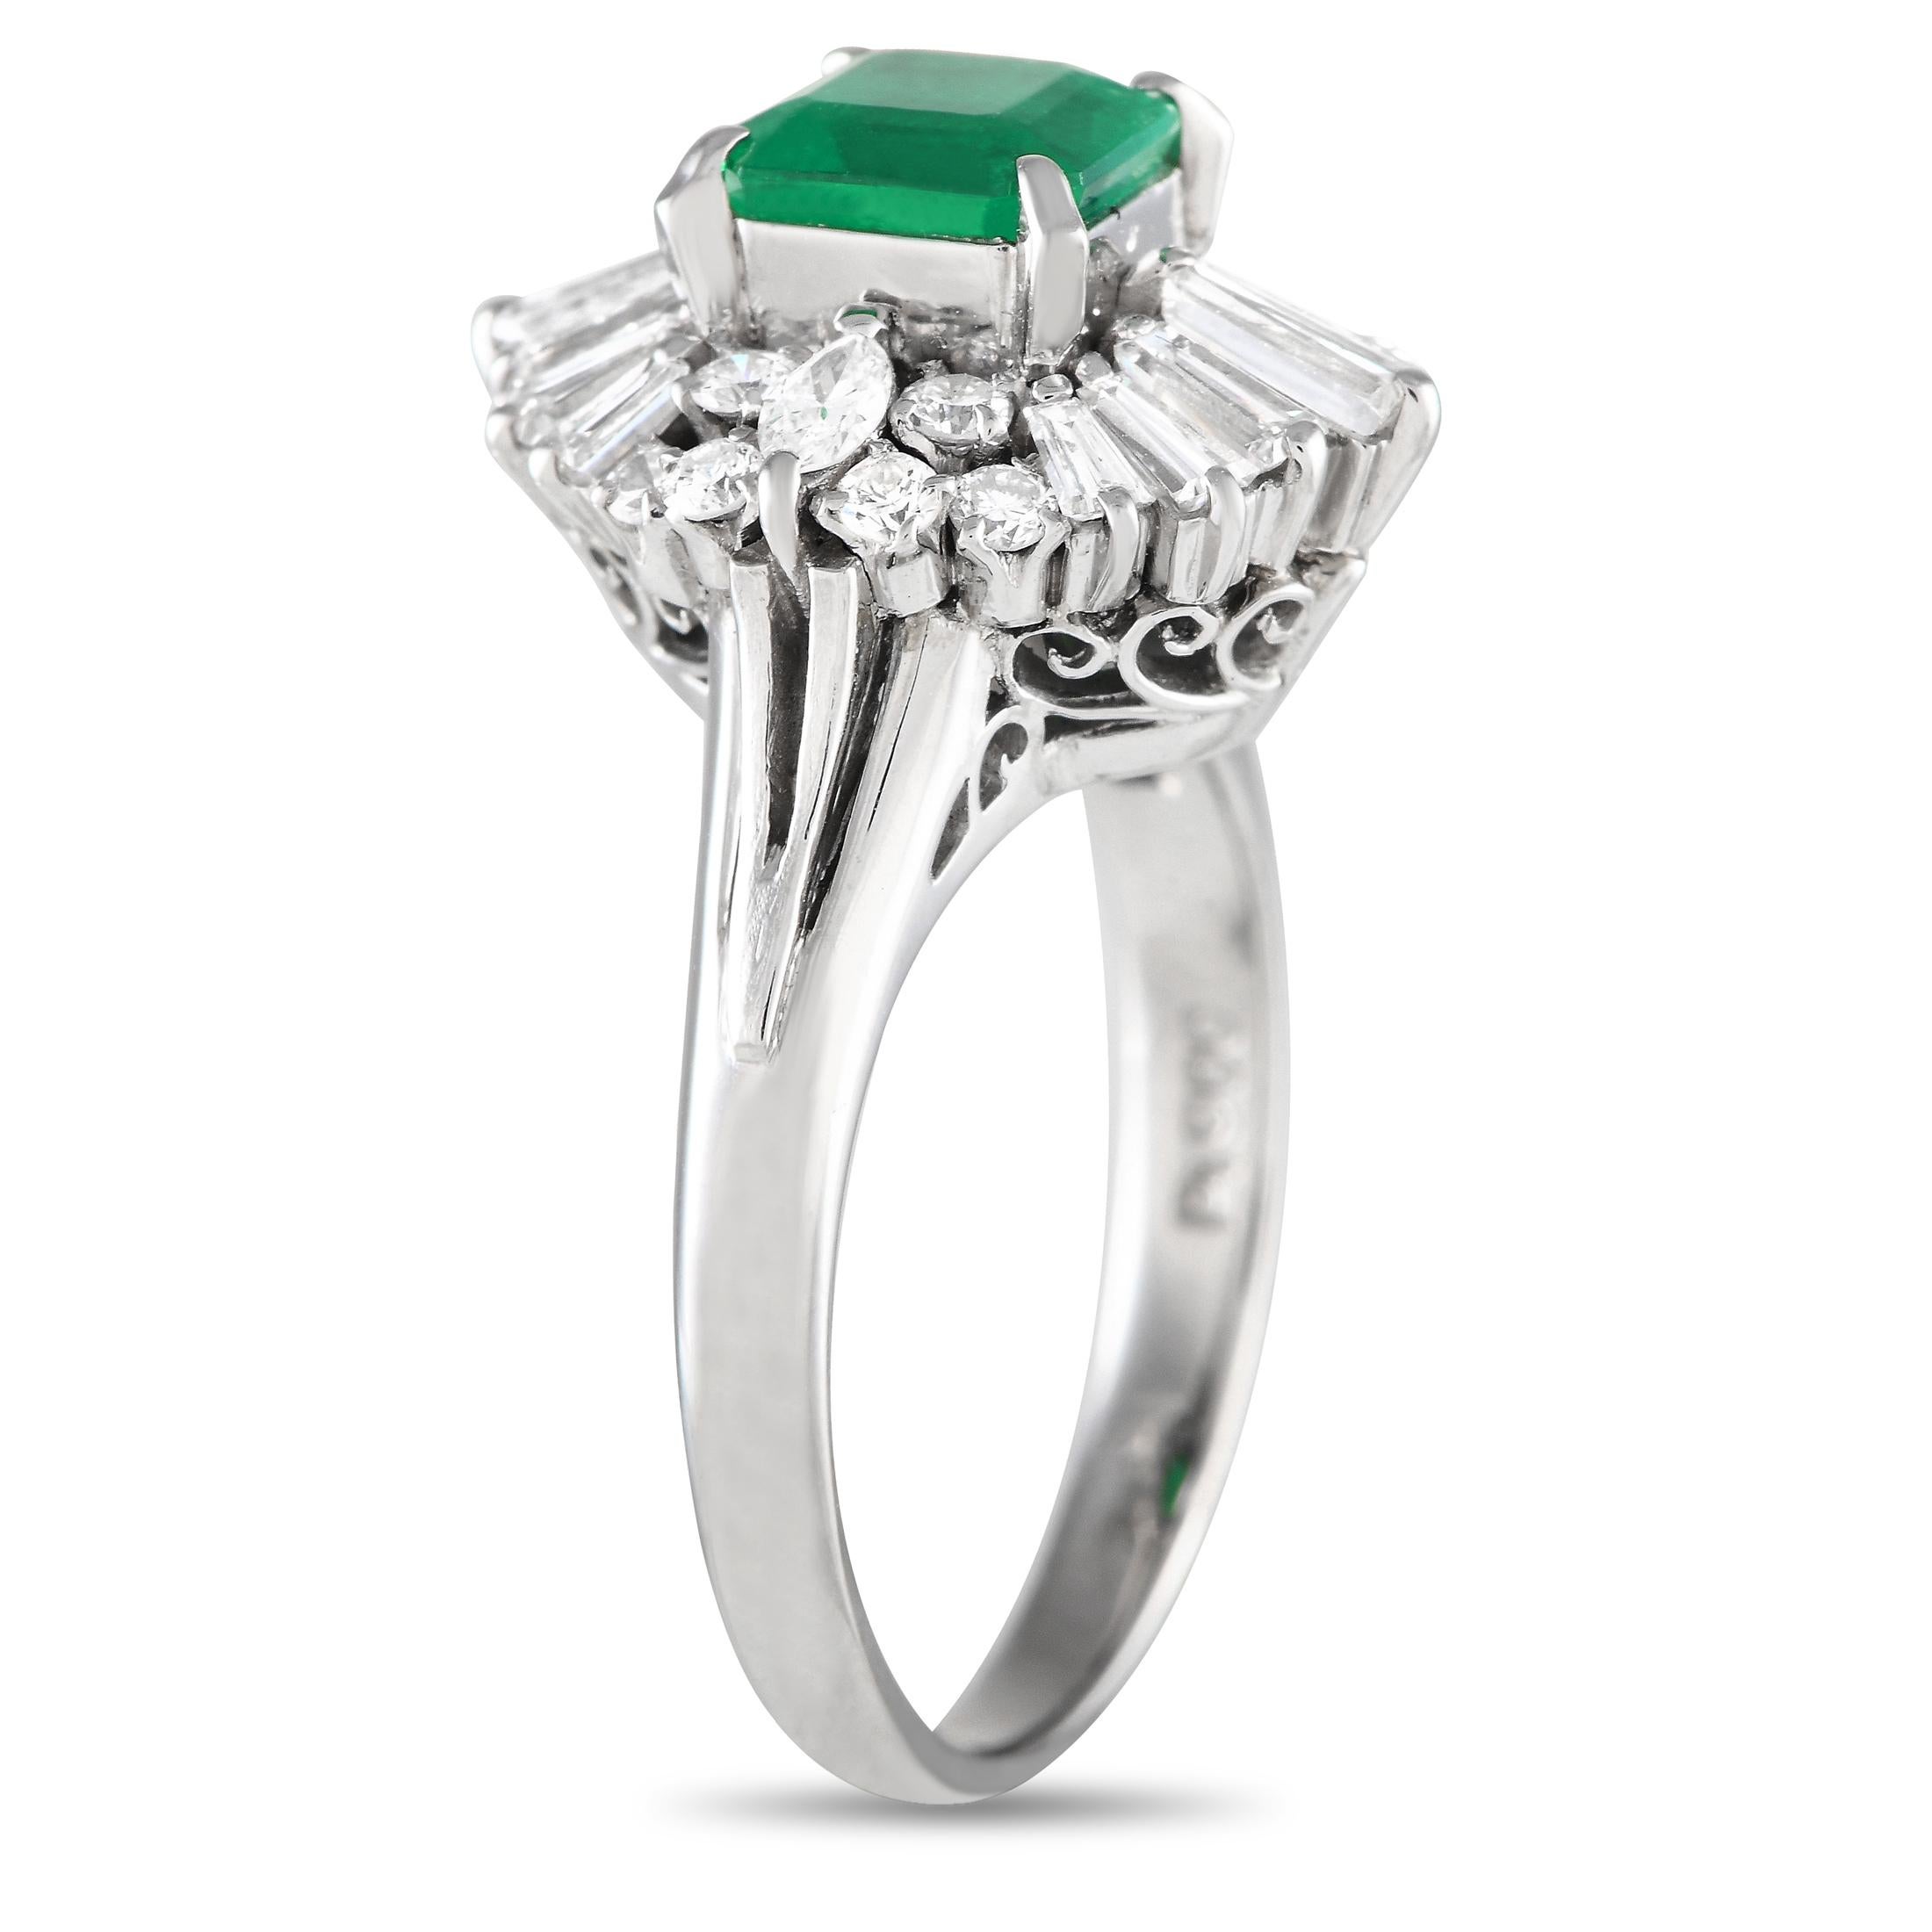 The delicate and detailed look of this Art Deco-inspired ring can't be missed. It features a polished band with grooved, split shoulders and a swirl-decorated gallery. Atop the ring is a 0.99 ct emerald stone on four prongs, surrounded by a